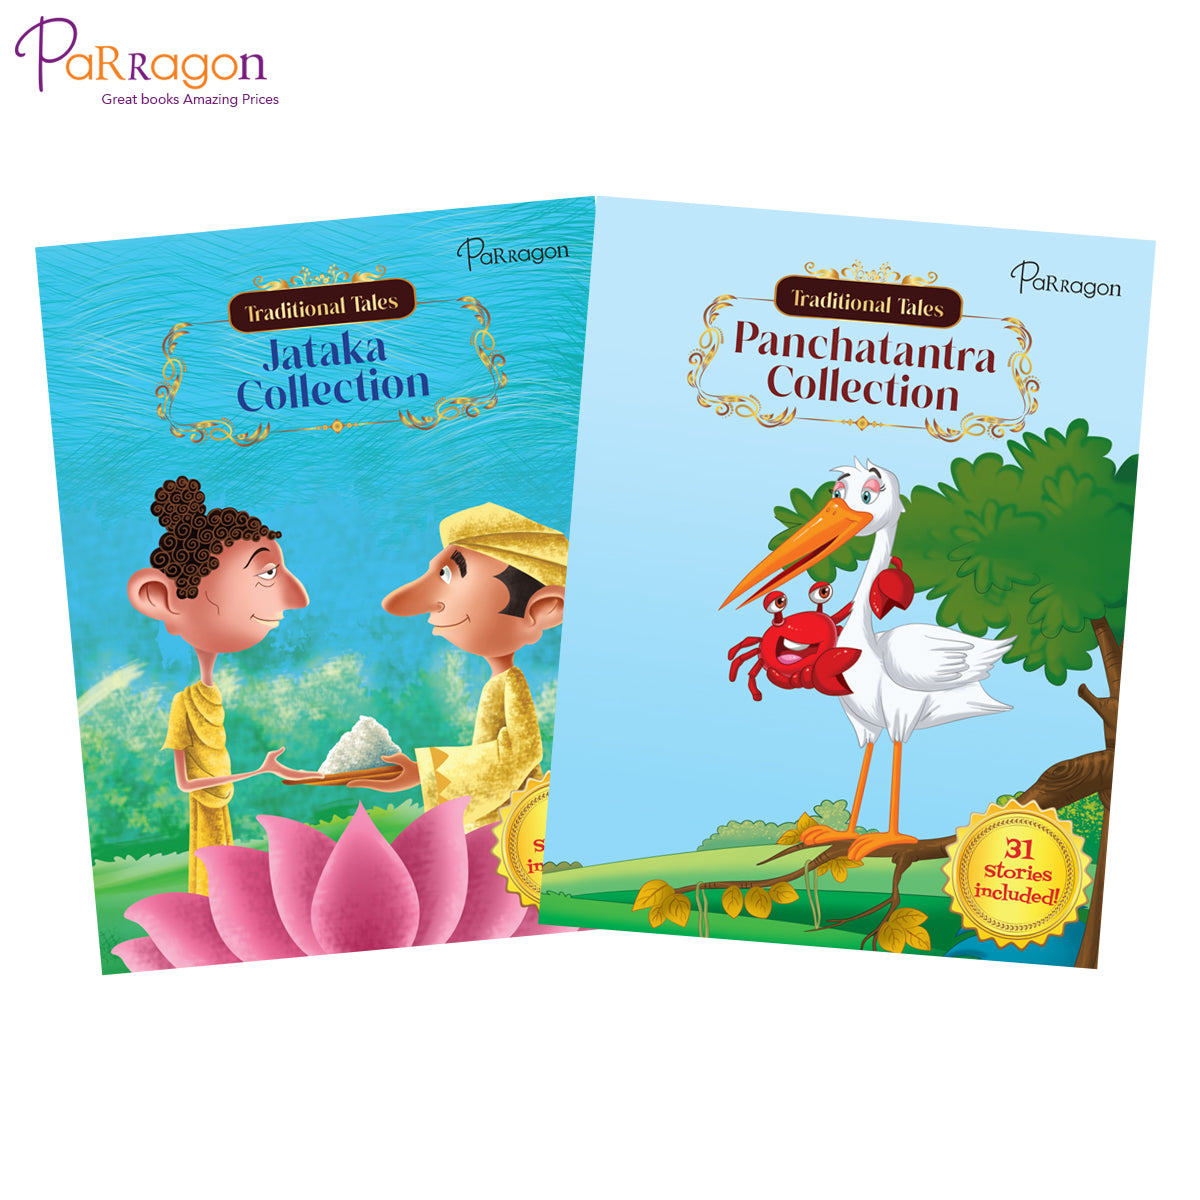 Traditional Tales Folk Stories - Panchatantra Collection & Jataka Collection (Set of 2 books)